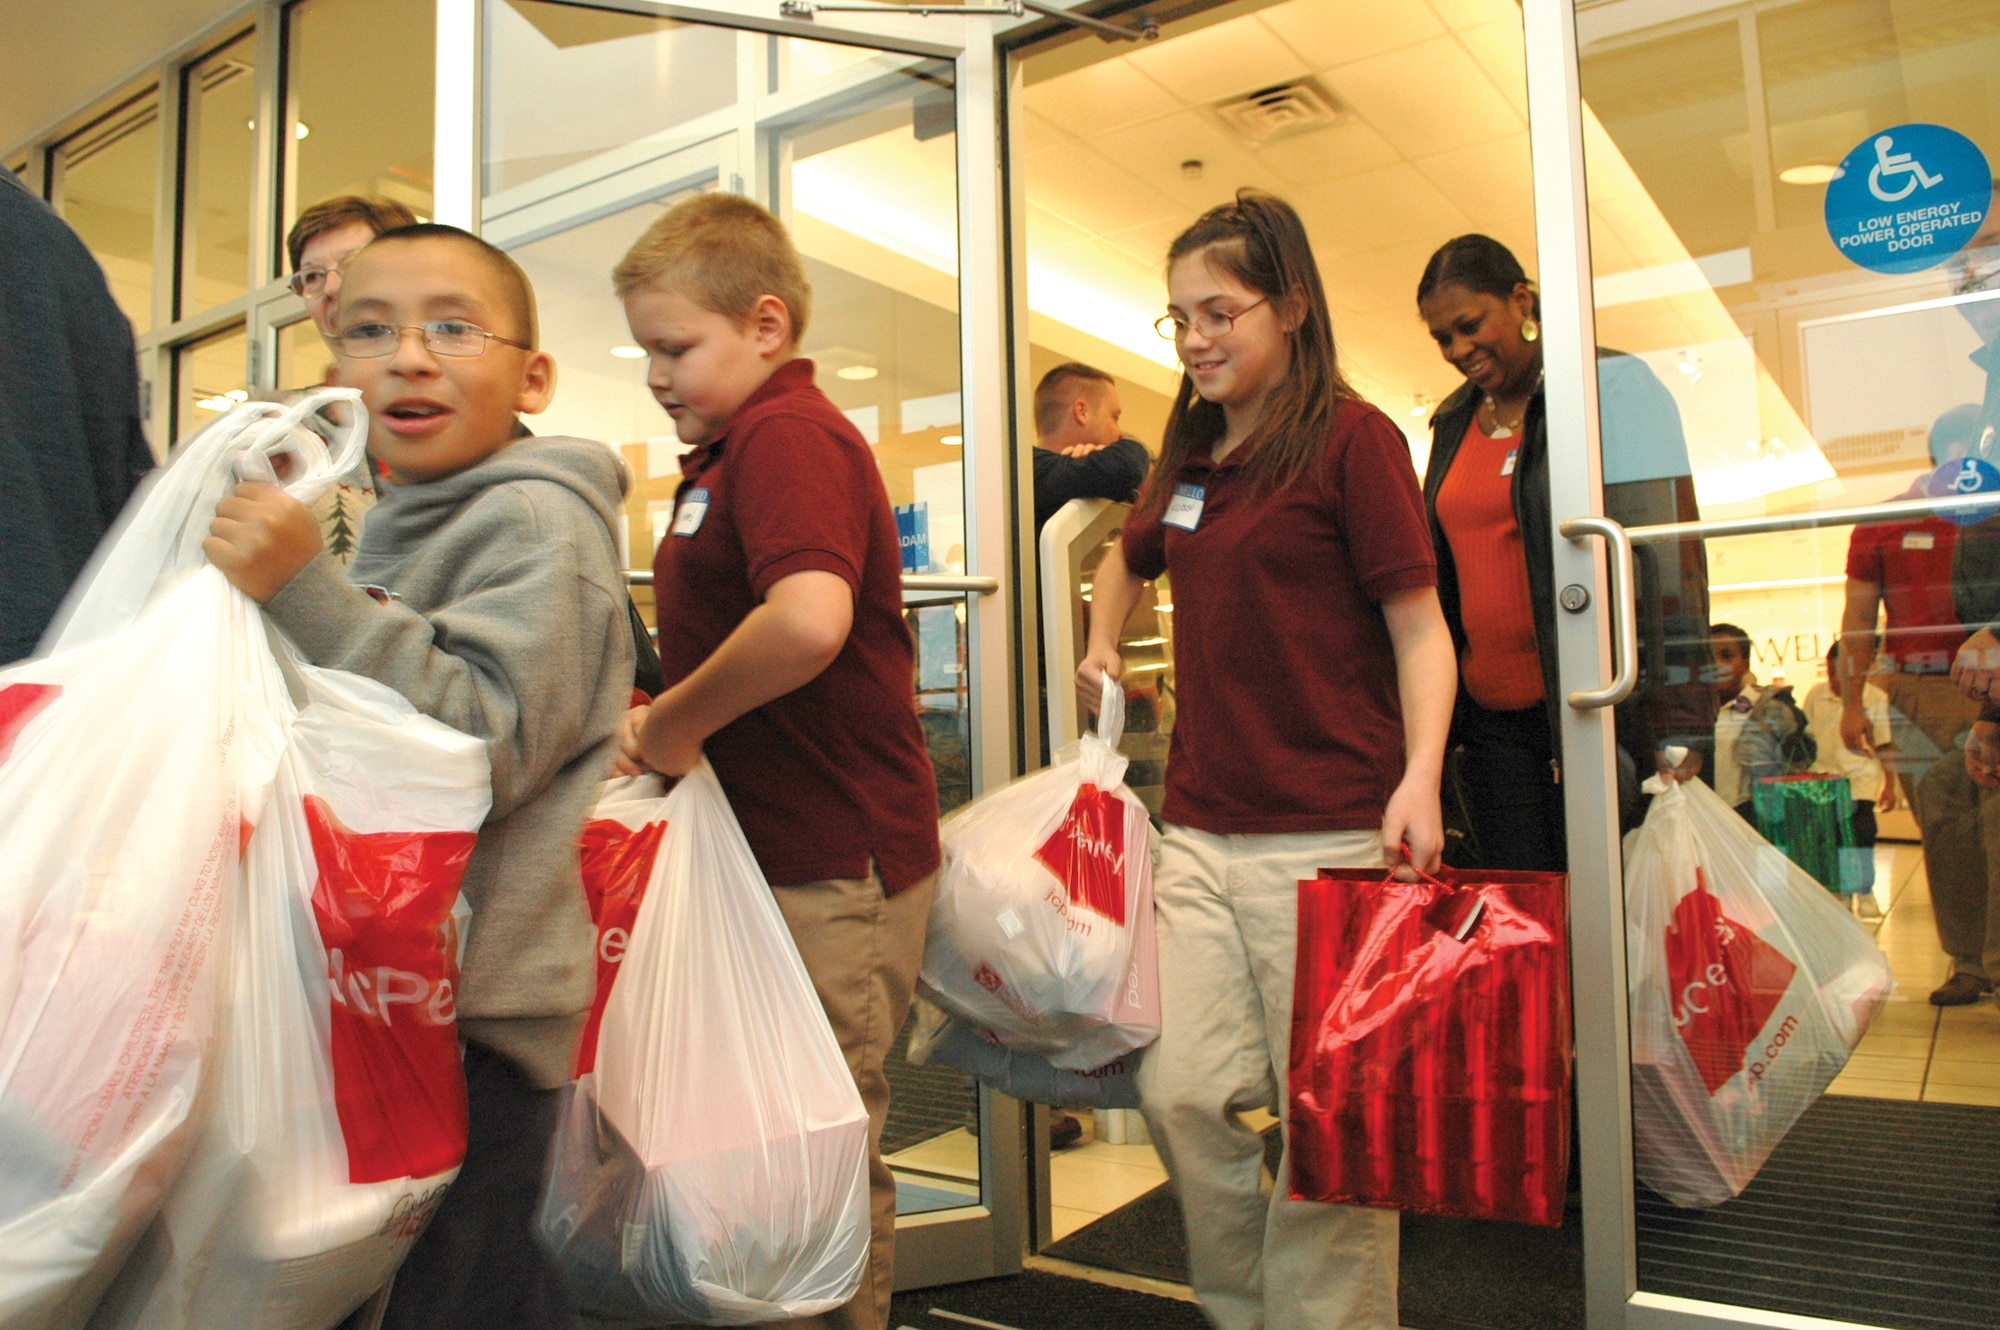 The B-52 Systems Program Office volunteers have been holding a Clothe-a-Kid drive for more than 30 years and on Dec. 8, they took 26 children shopping at the same department store. Full bags and smiles are on display as the children leave from their shopping trip.(Air Force photo by 1st Lt. Sam Lee)
